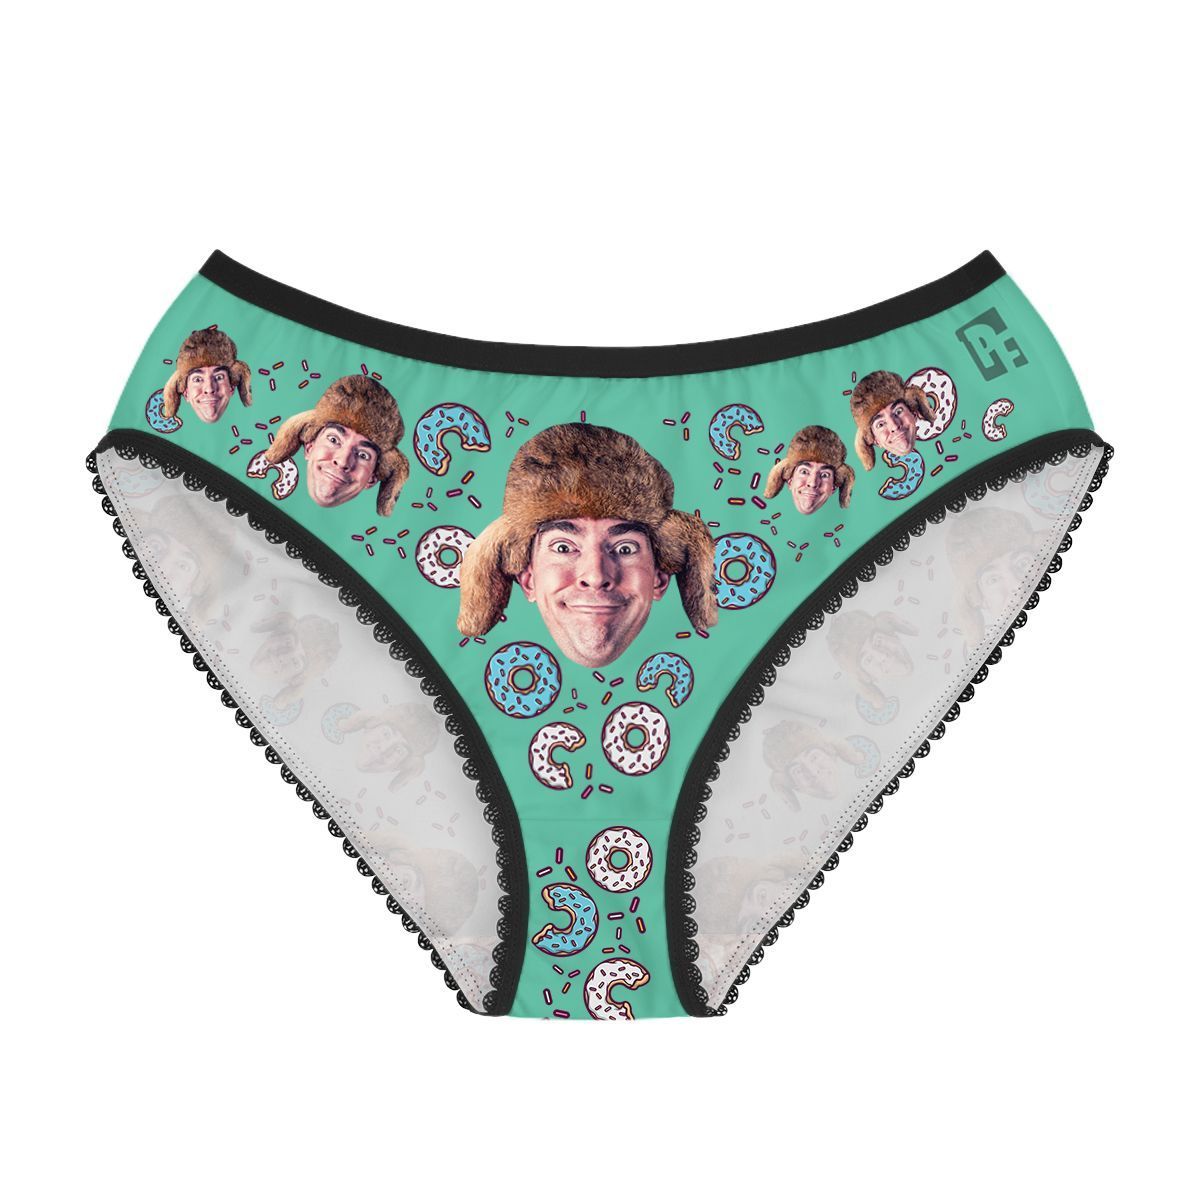 Mint Donuts women's underwear briefs personalized with photo printed on them